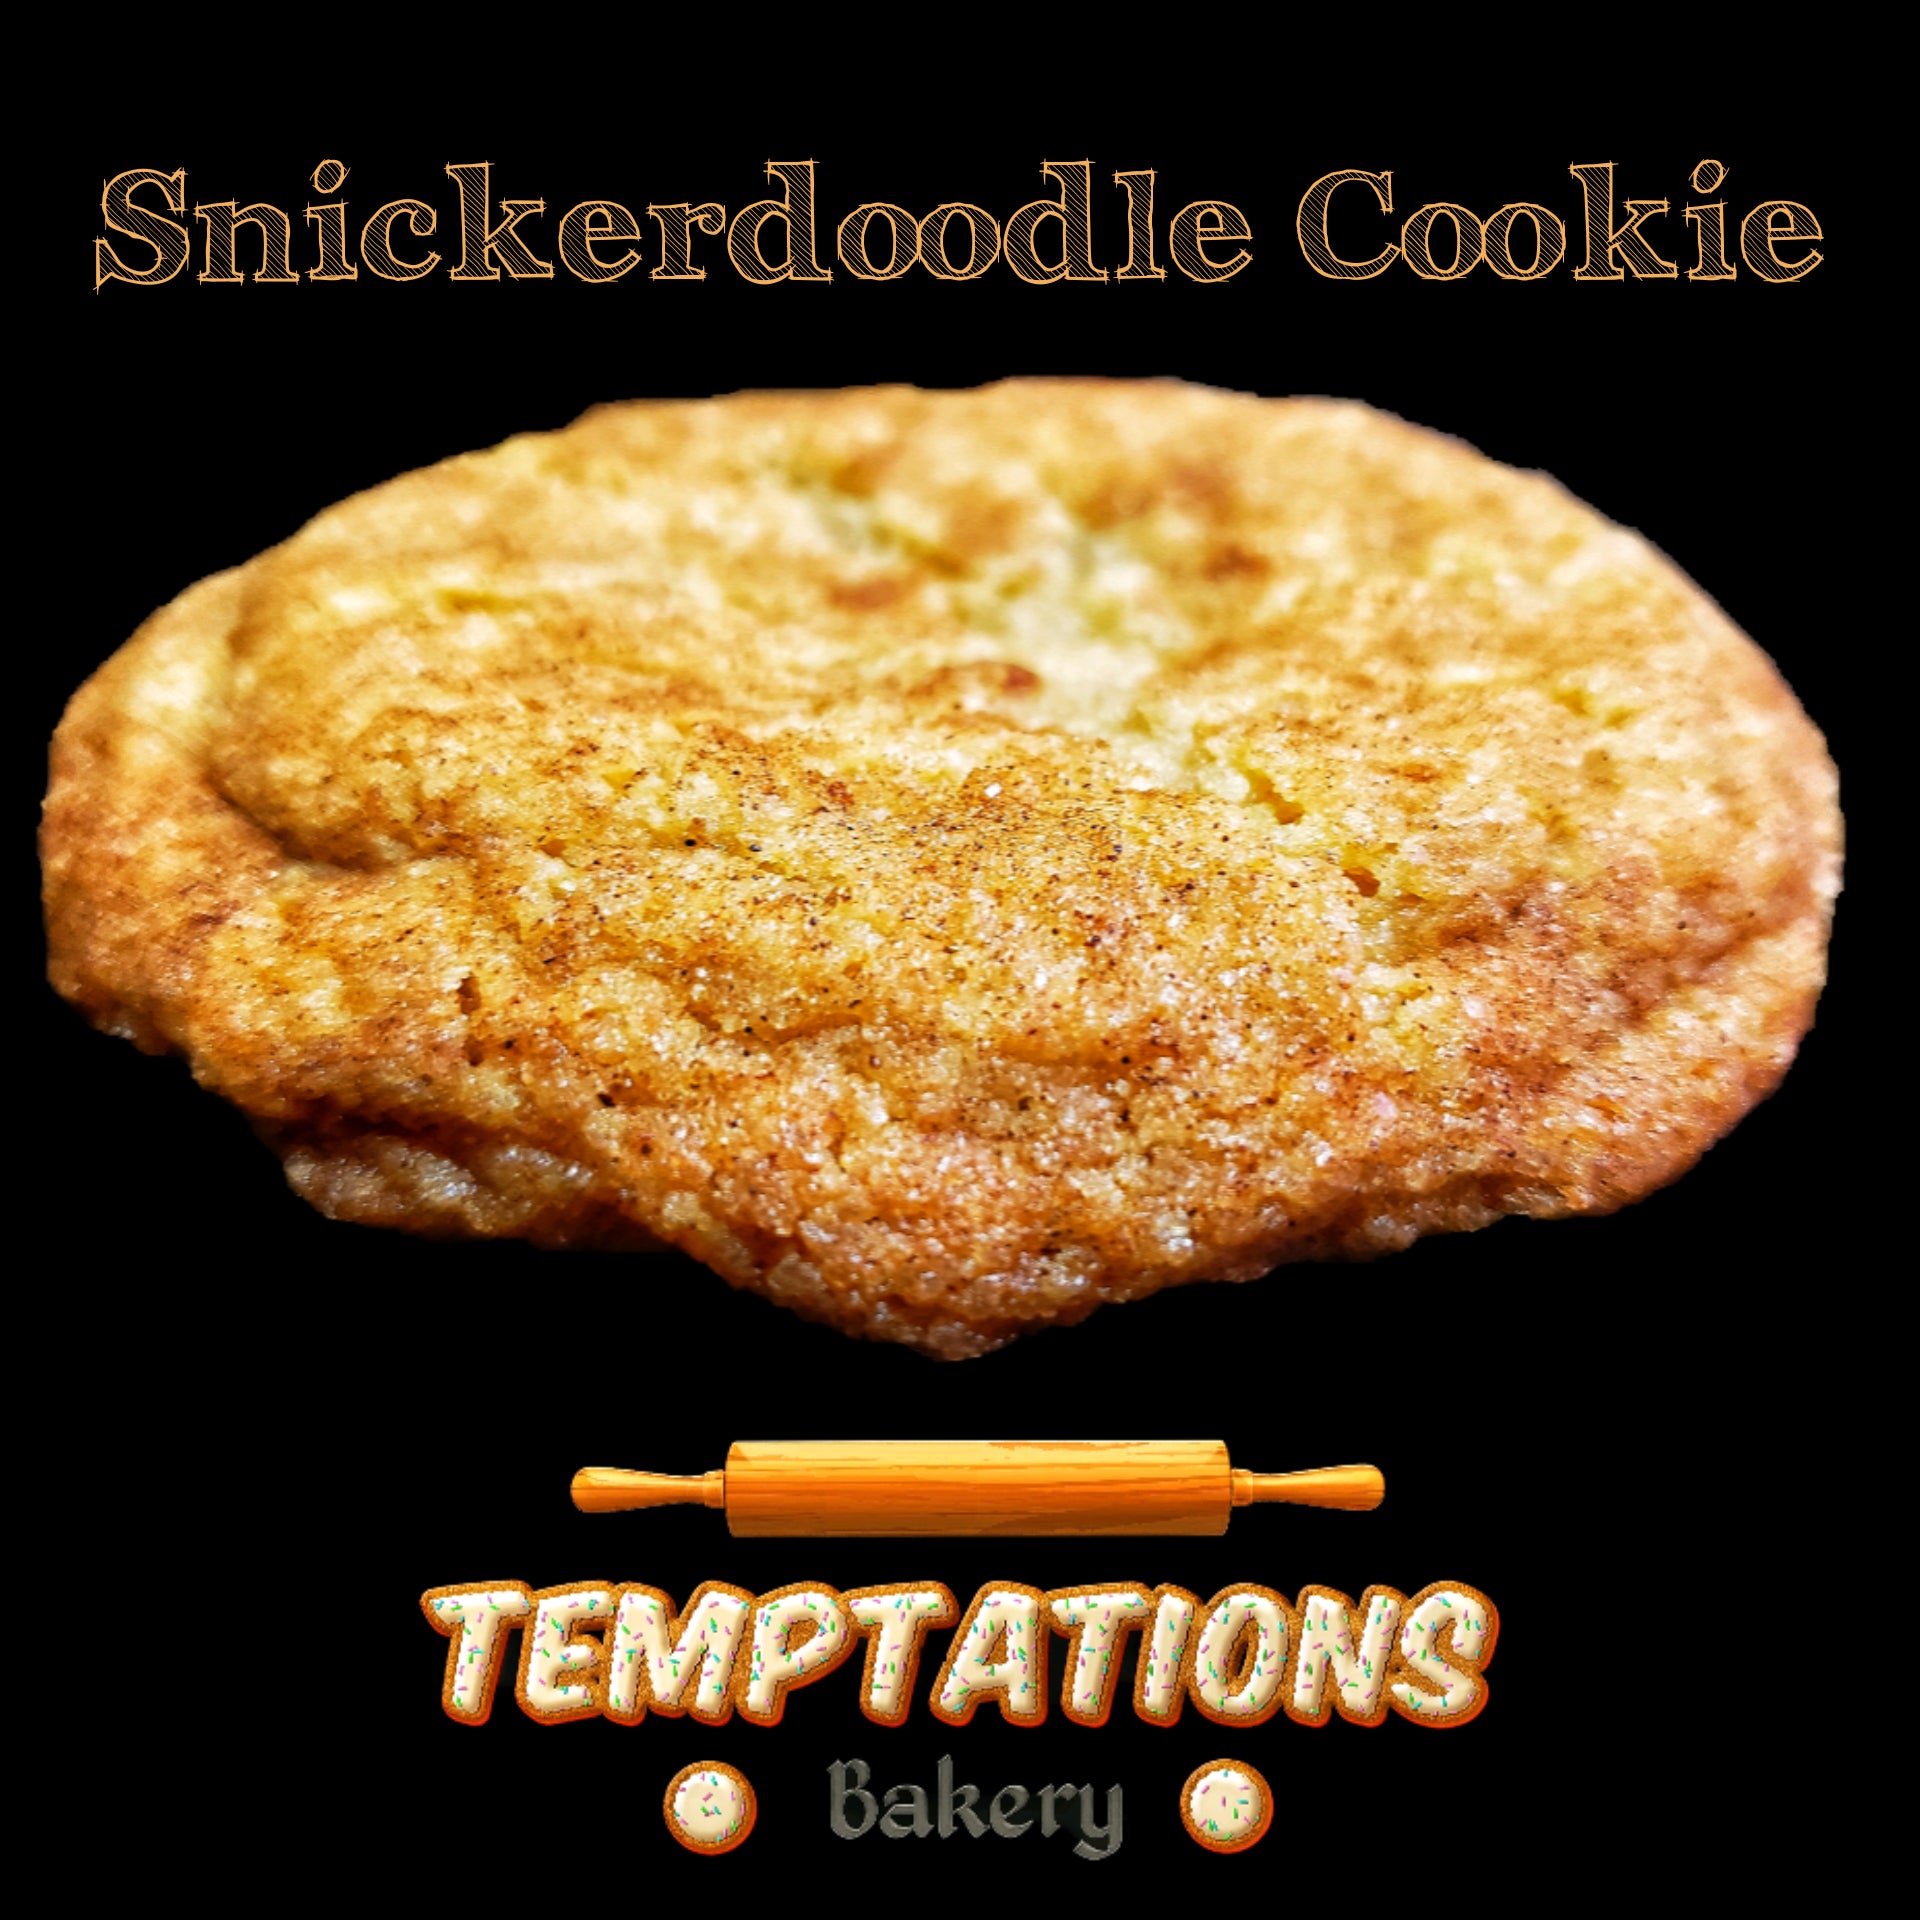 NEW! 2 POUNDS OF SNICKERDOODLE COOKIES - (Artisan Bakery Box)